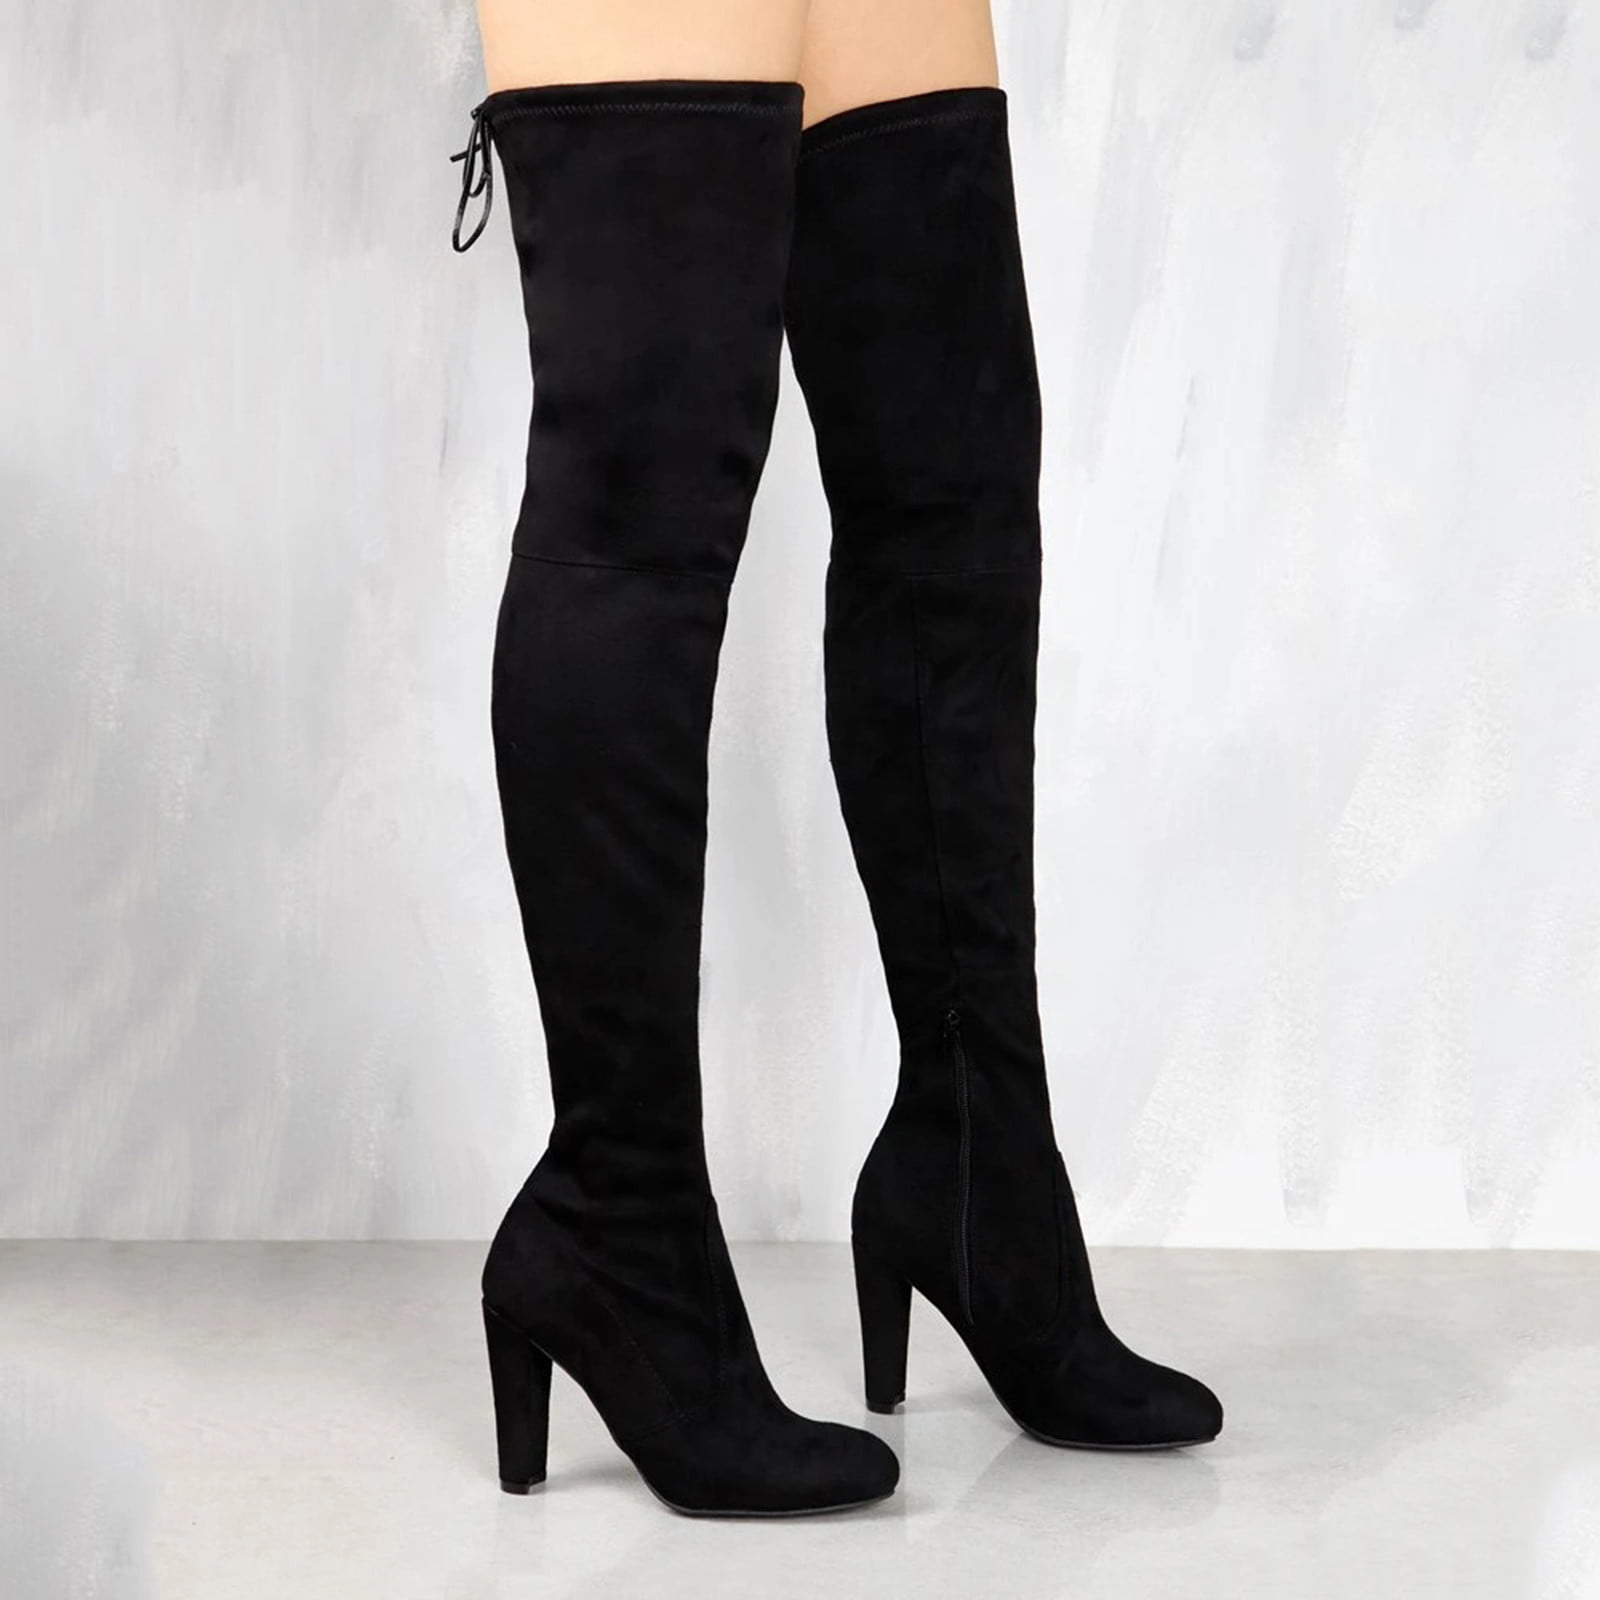 Look Fabulous In Outfits With Long Black Boots | Long boots outfit, Black  boots outfit, Fashion